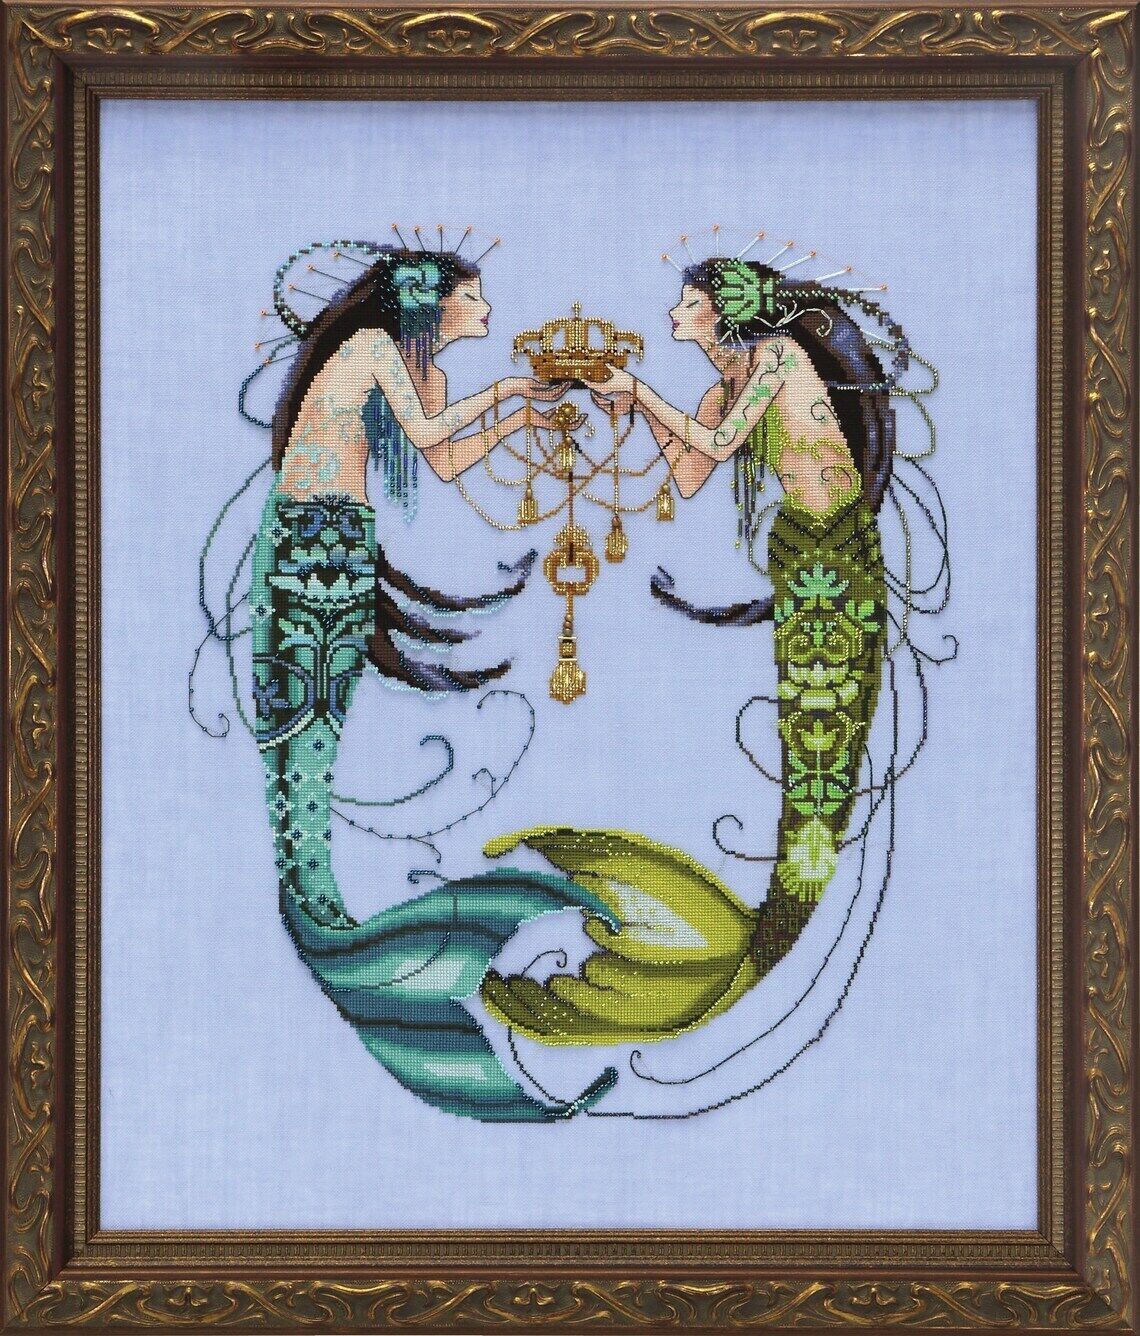 Primary image for MD141 "The Twin Mermaids" Mirabilia Design Cross Stitch Chart With Embellishment